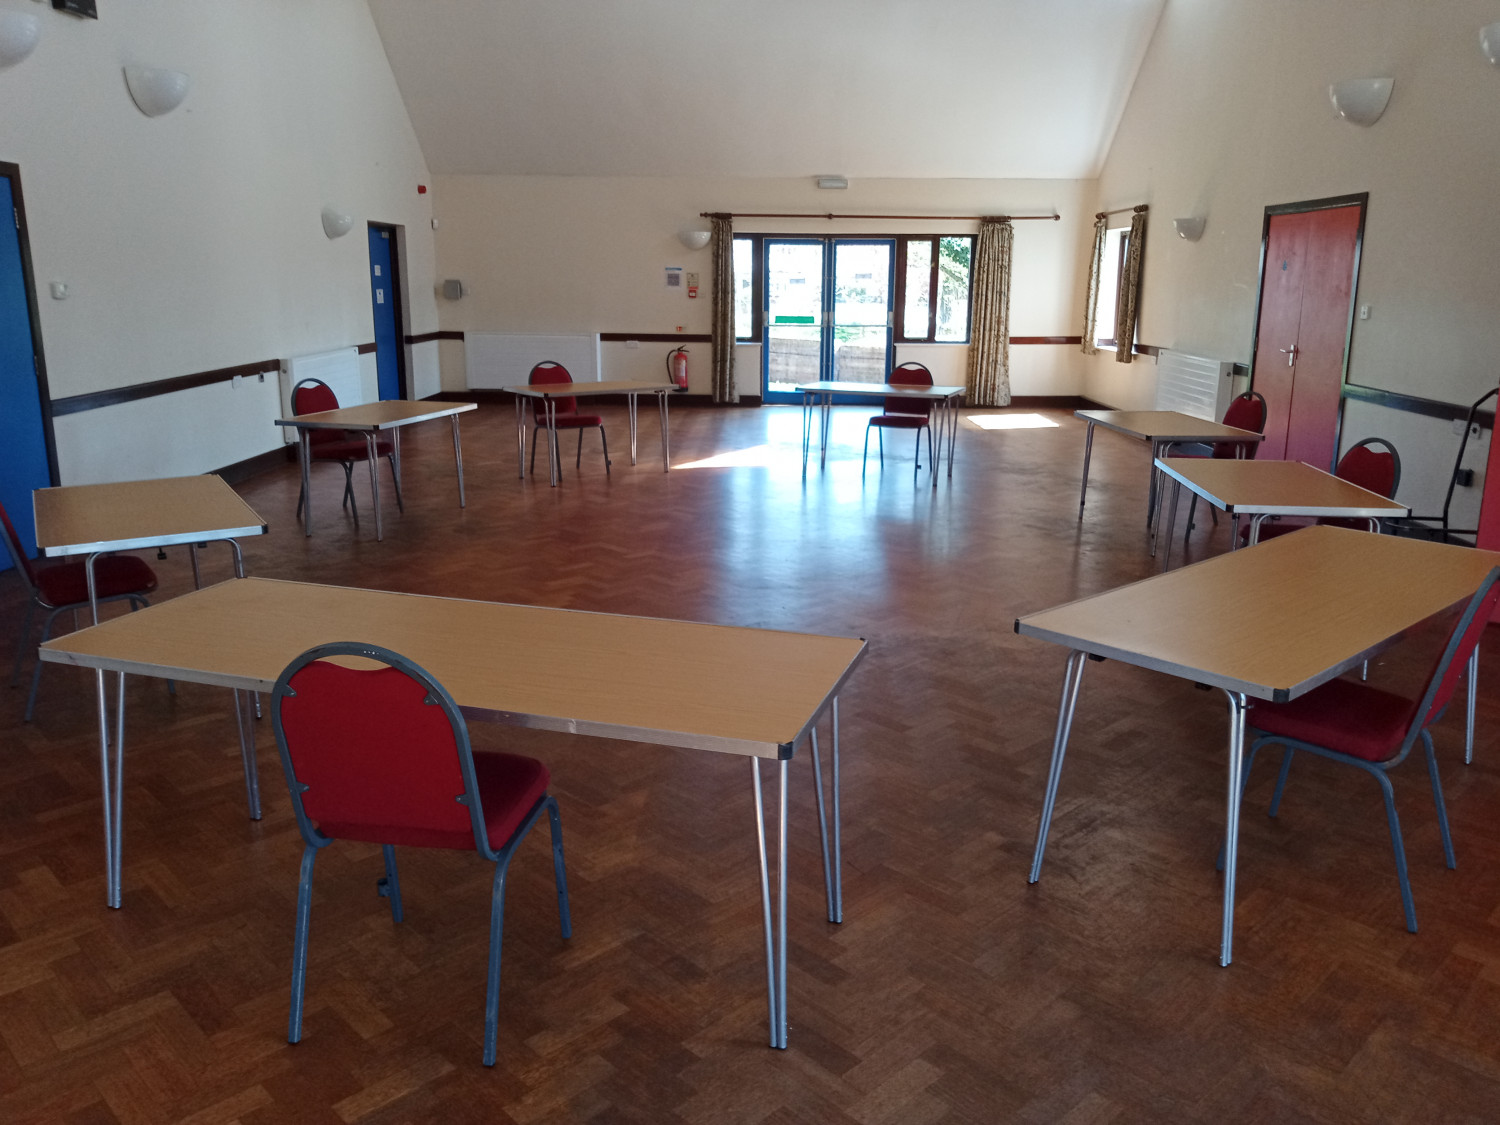 Hall with tables and chairs